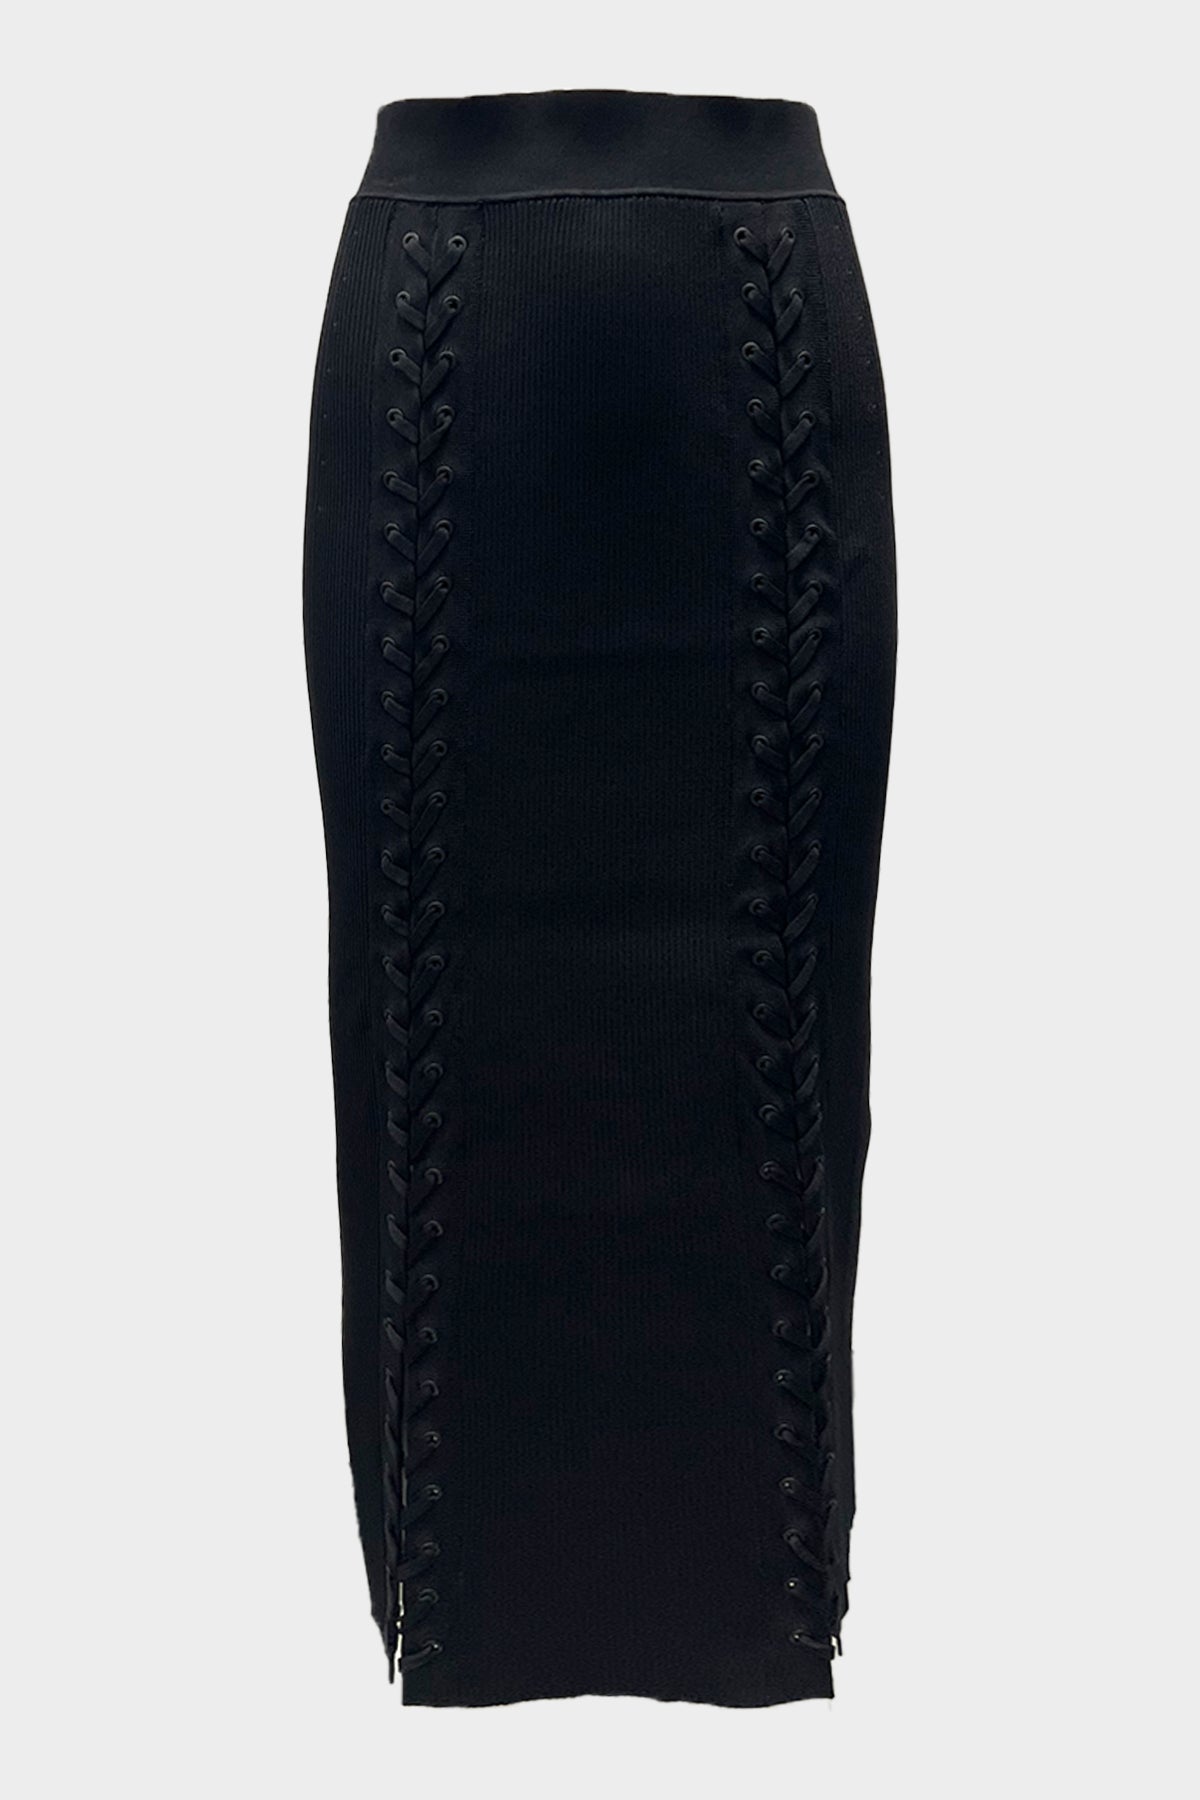 Helly Lace Up Midi Skirt in Black - shop-olivia.com